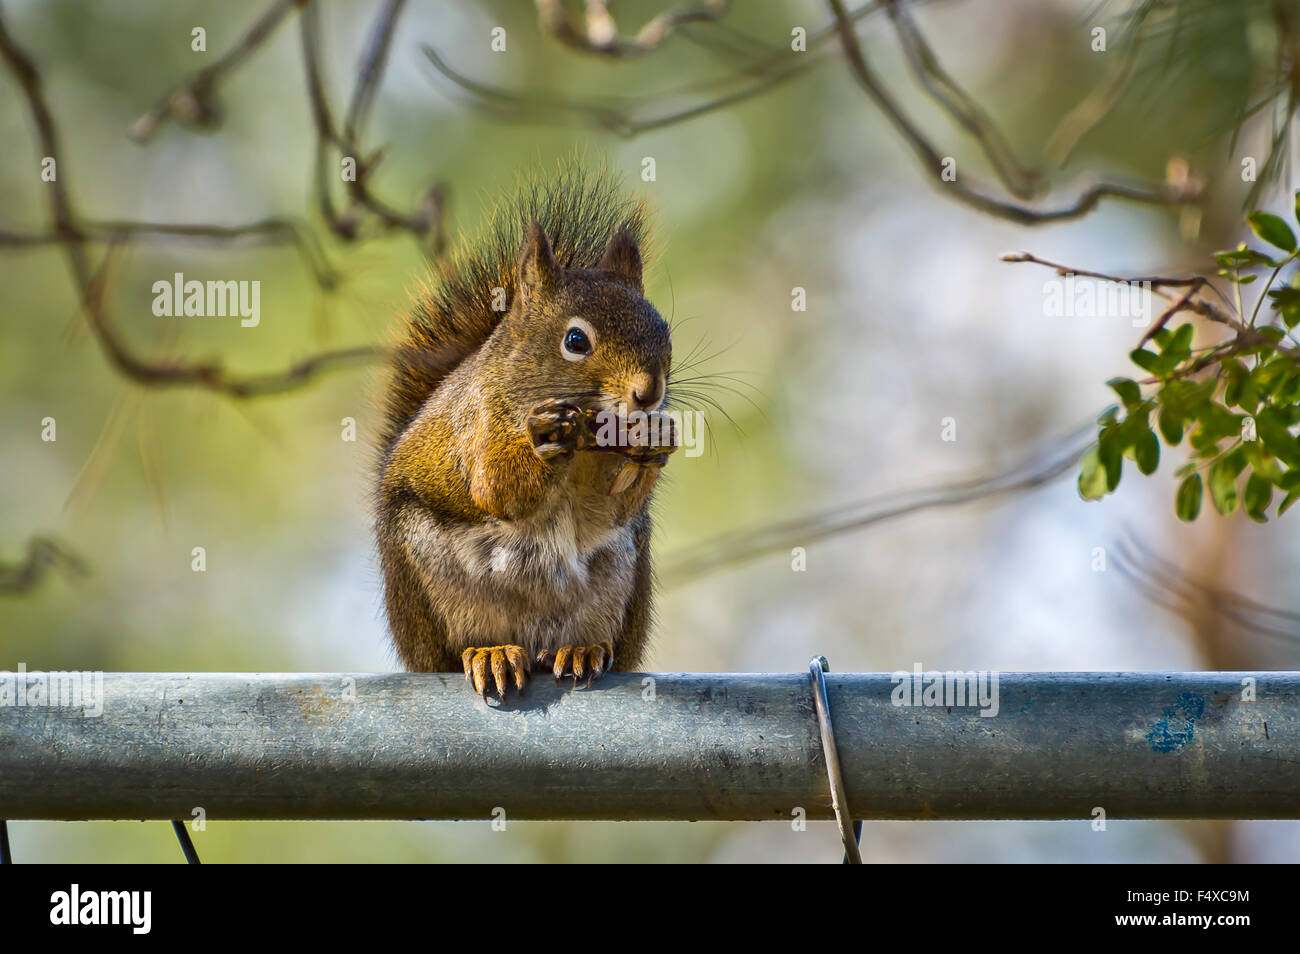 Squirrel eating on a fence, clutching it's treasure in its claws. Stock Photo